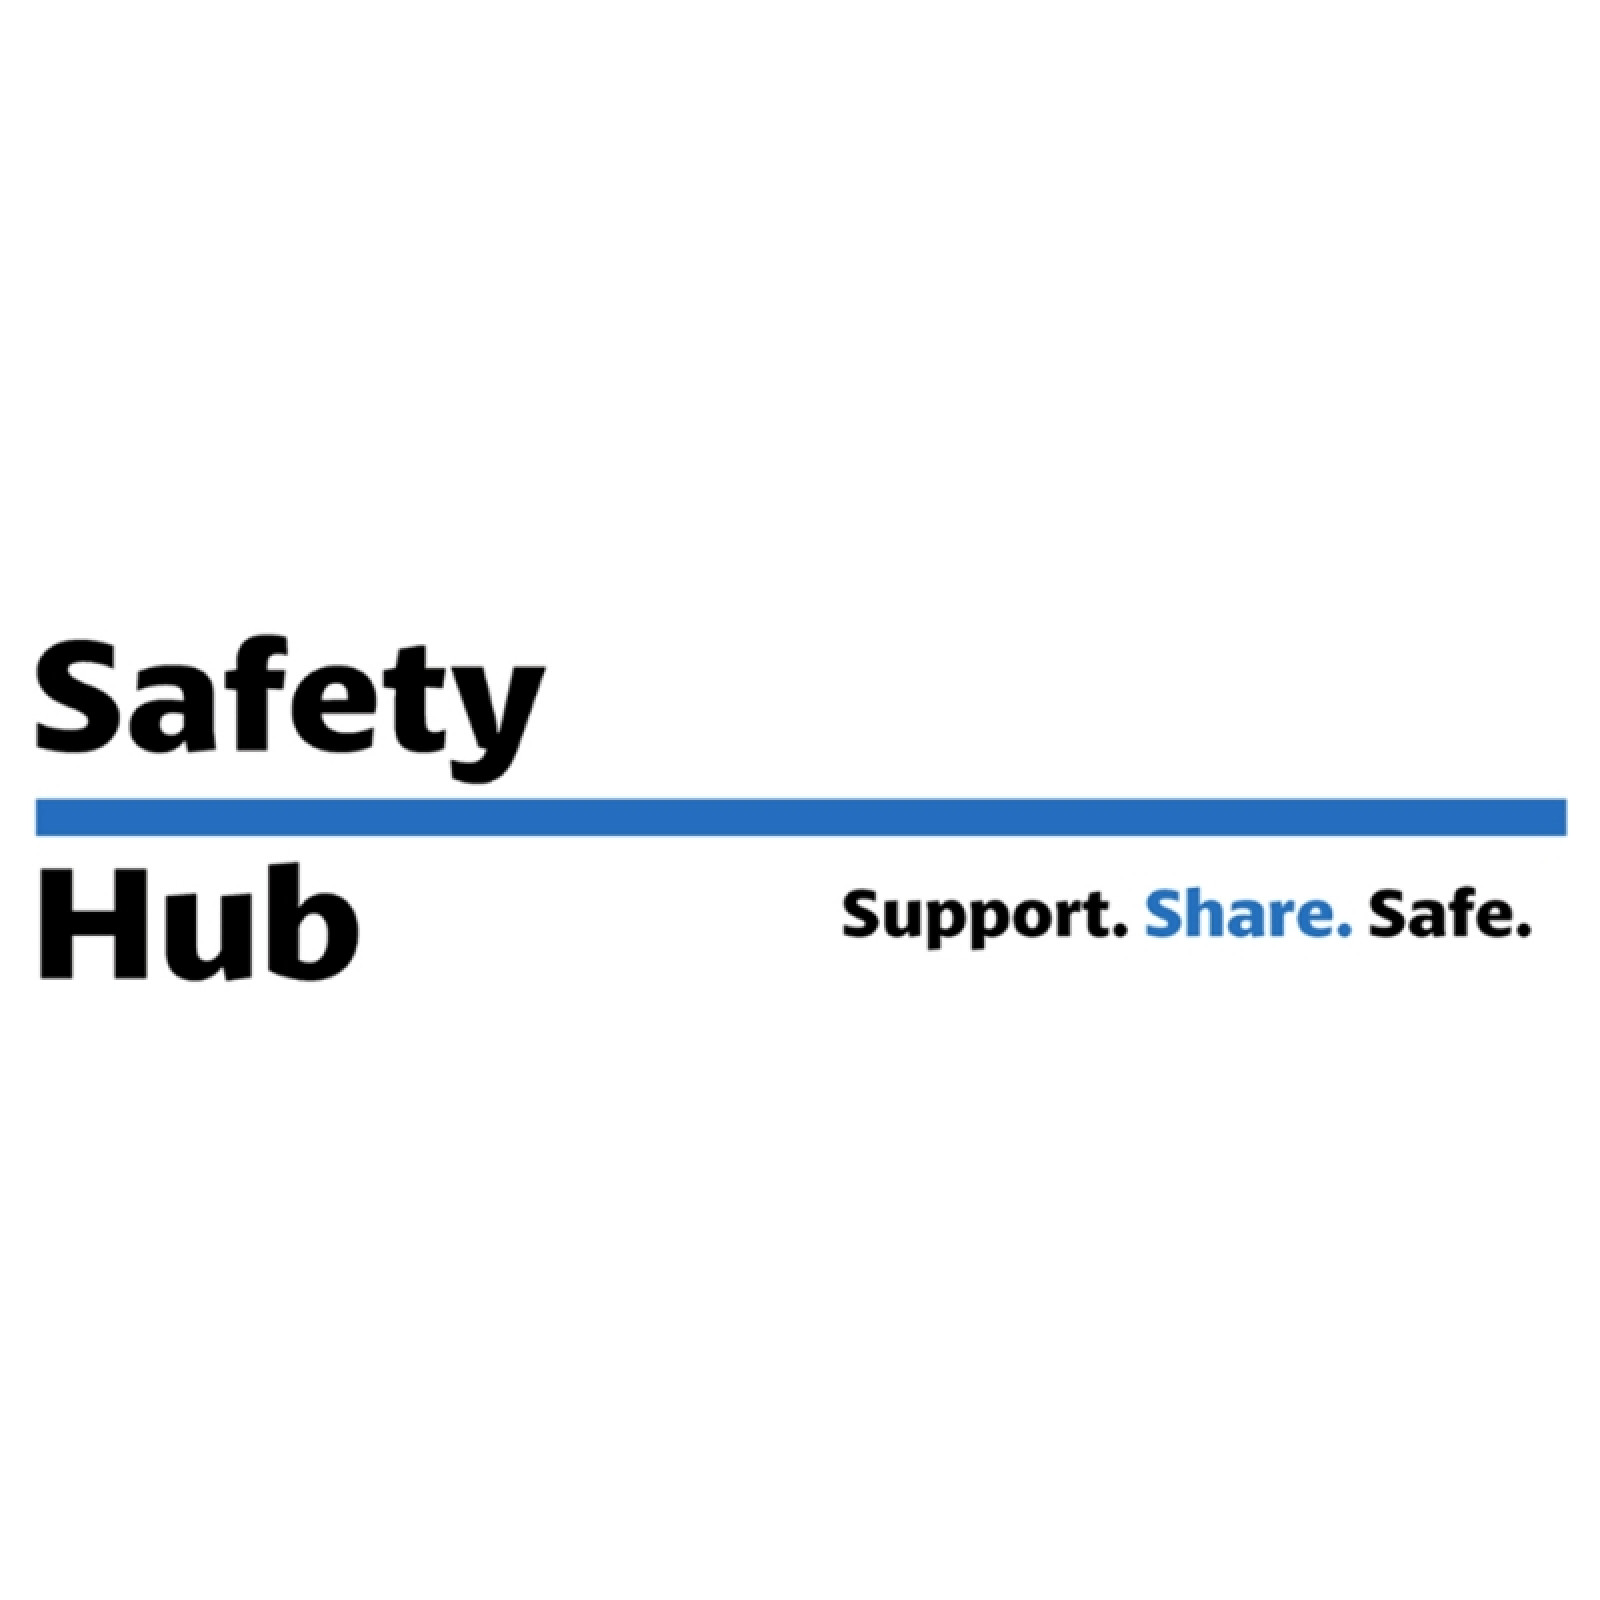 Launch of our new Safety Hub